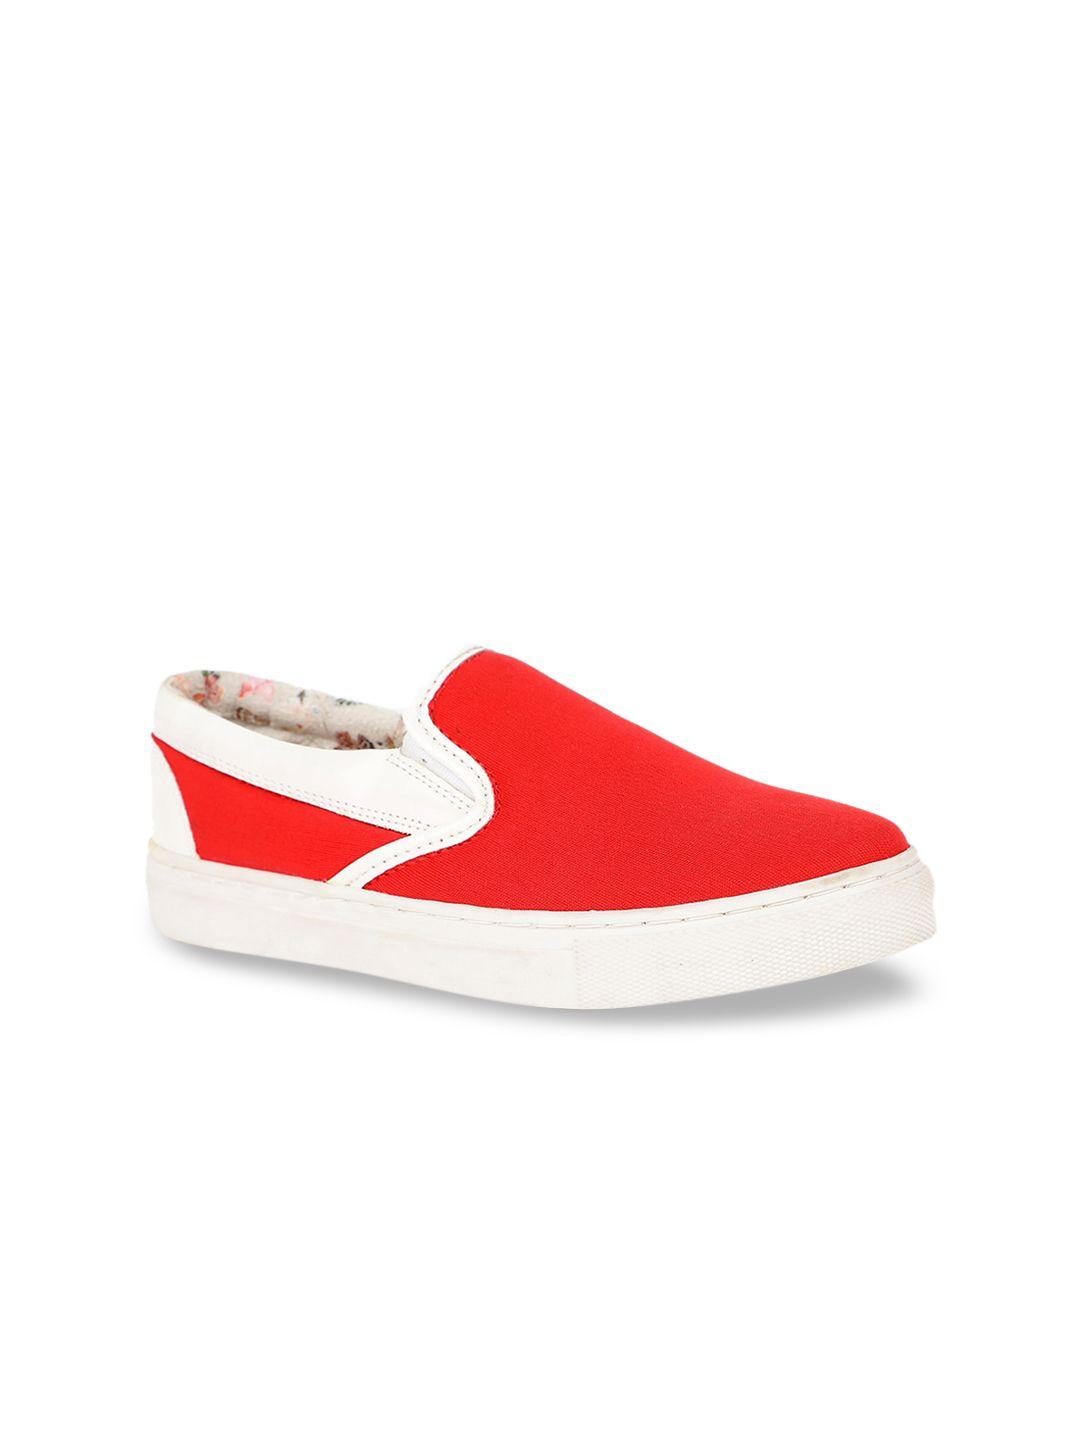 north star women red solid slip-on sneakers